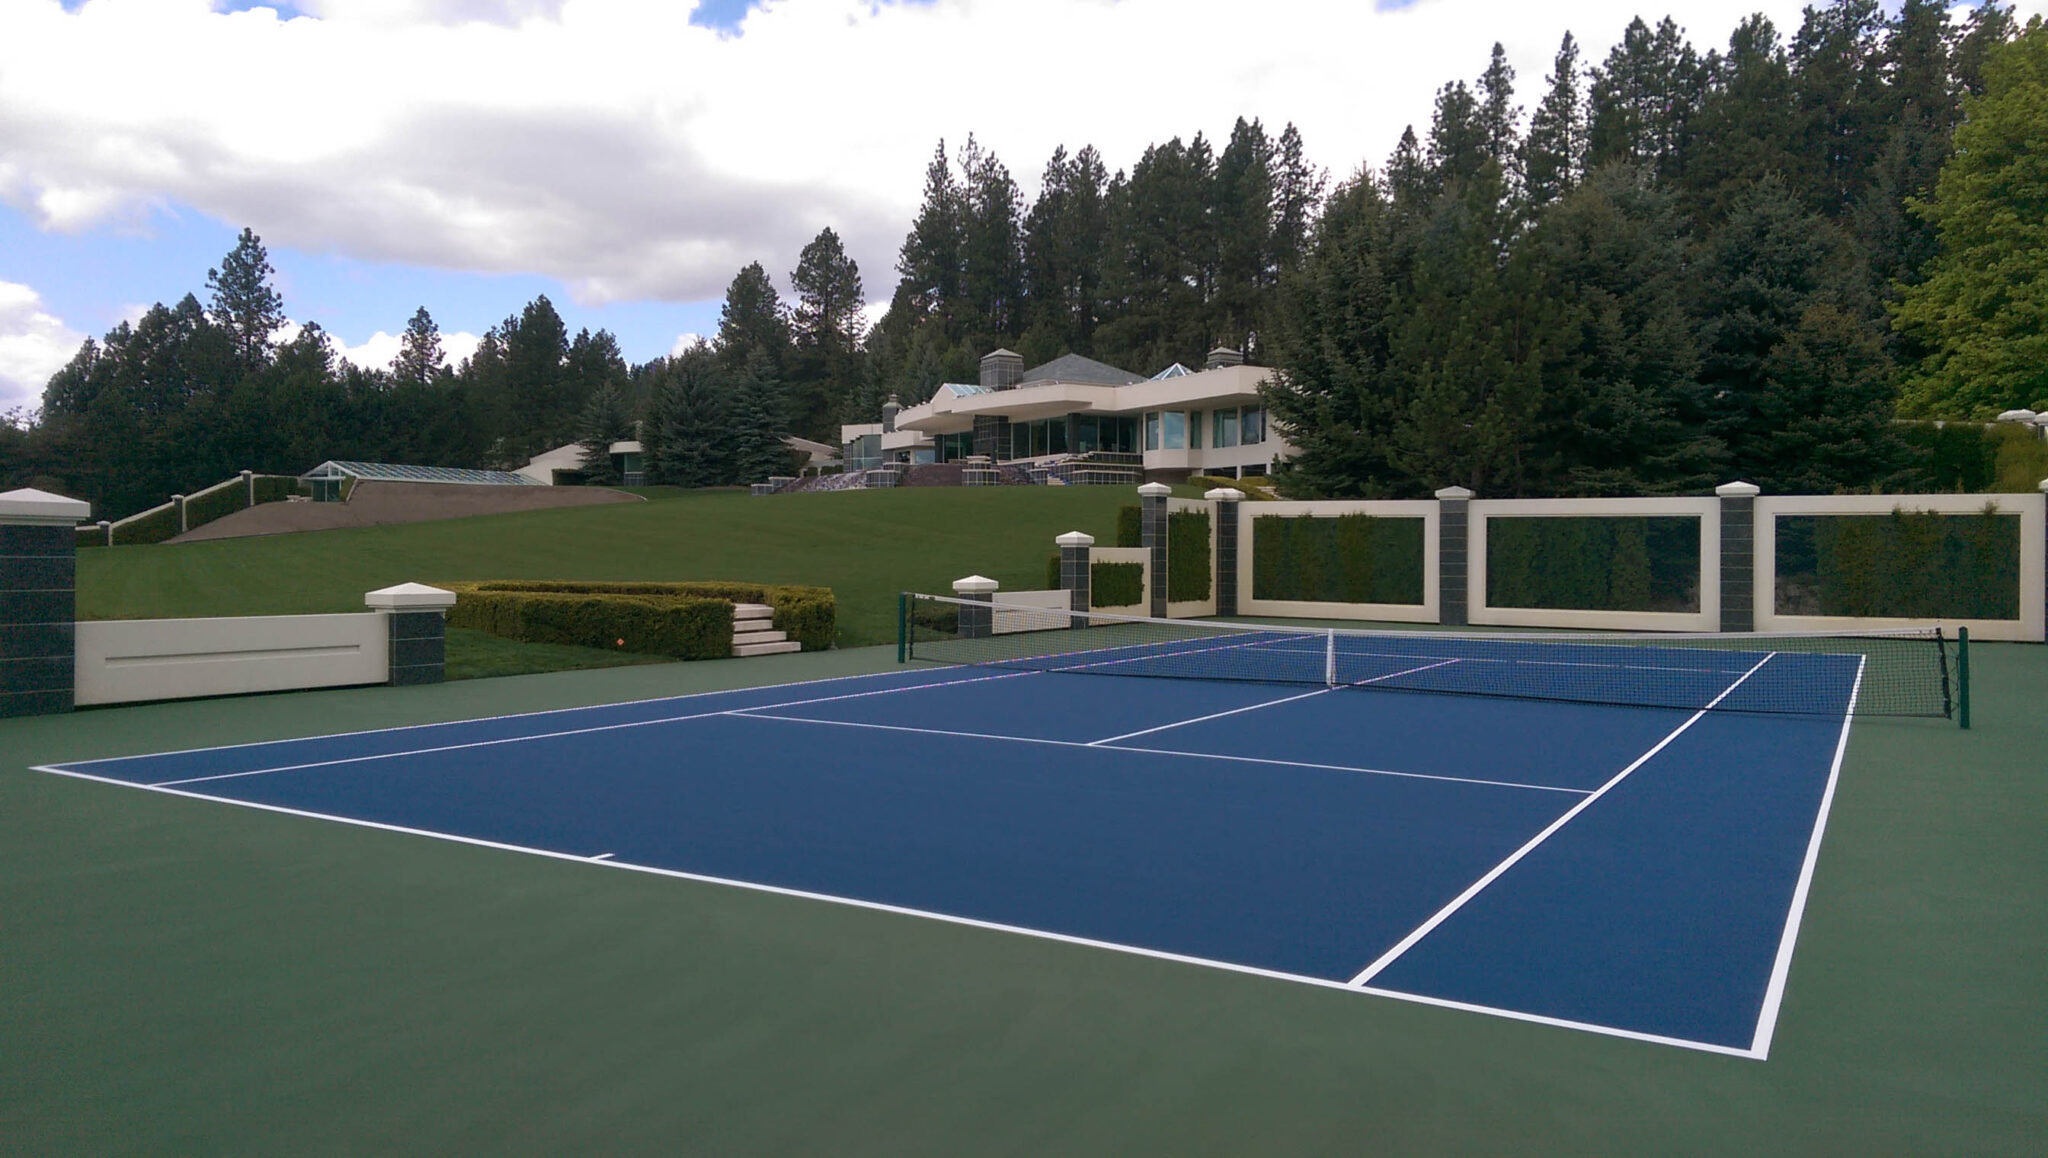 A new tennis court in a backyard with nice fencing and a court color scheme of green, blue, and white.